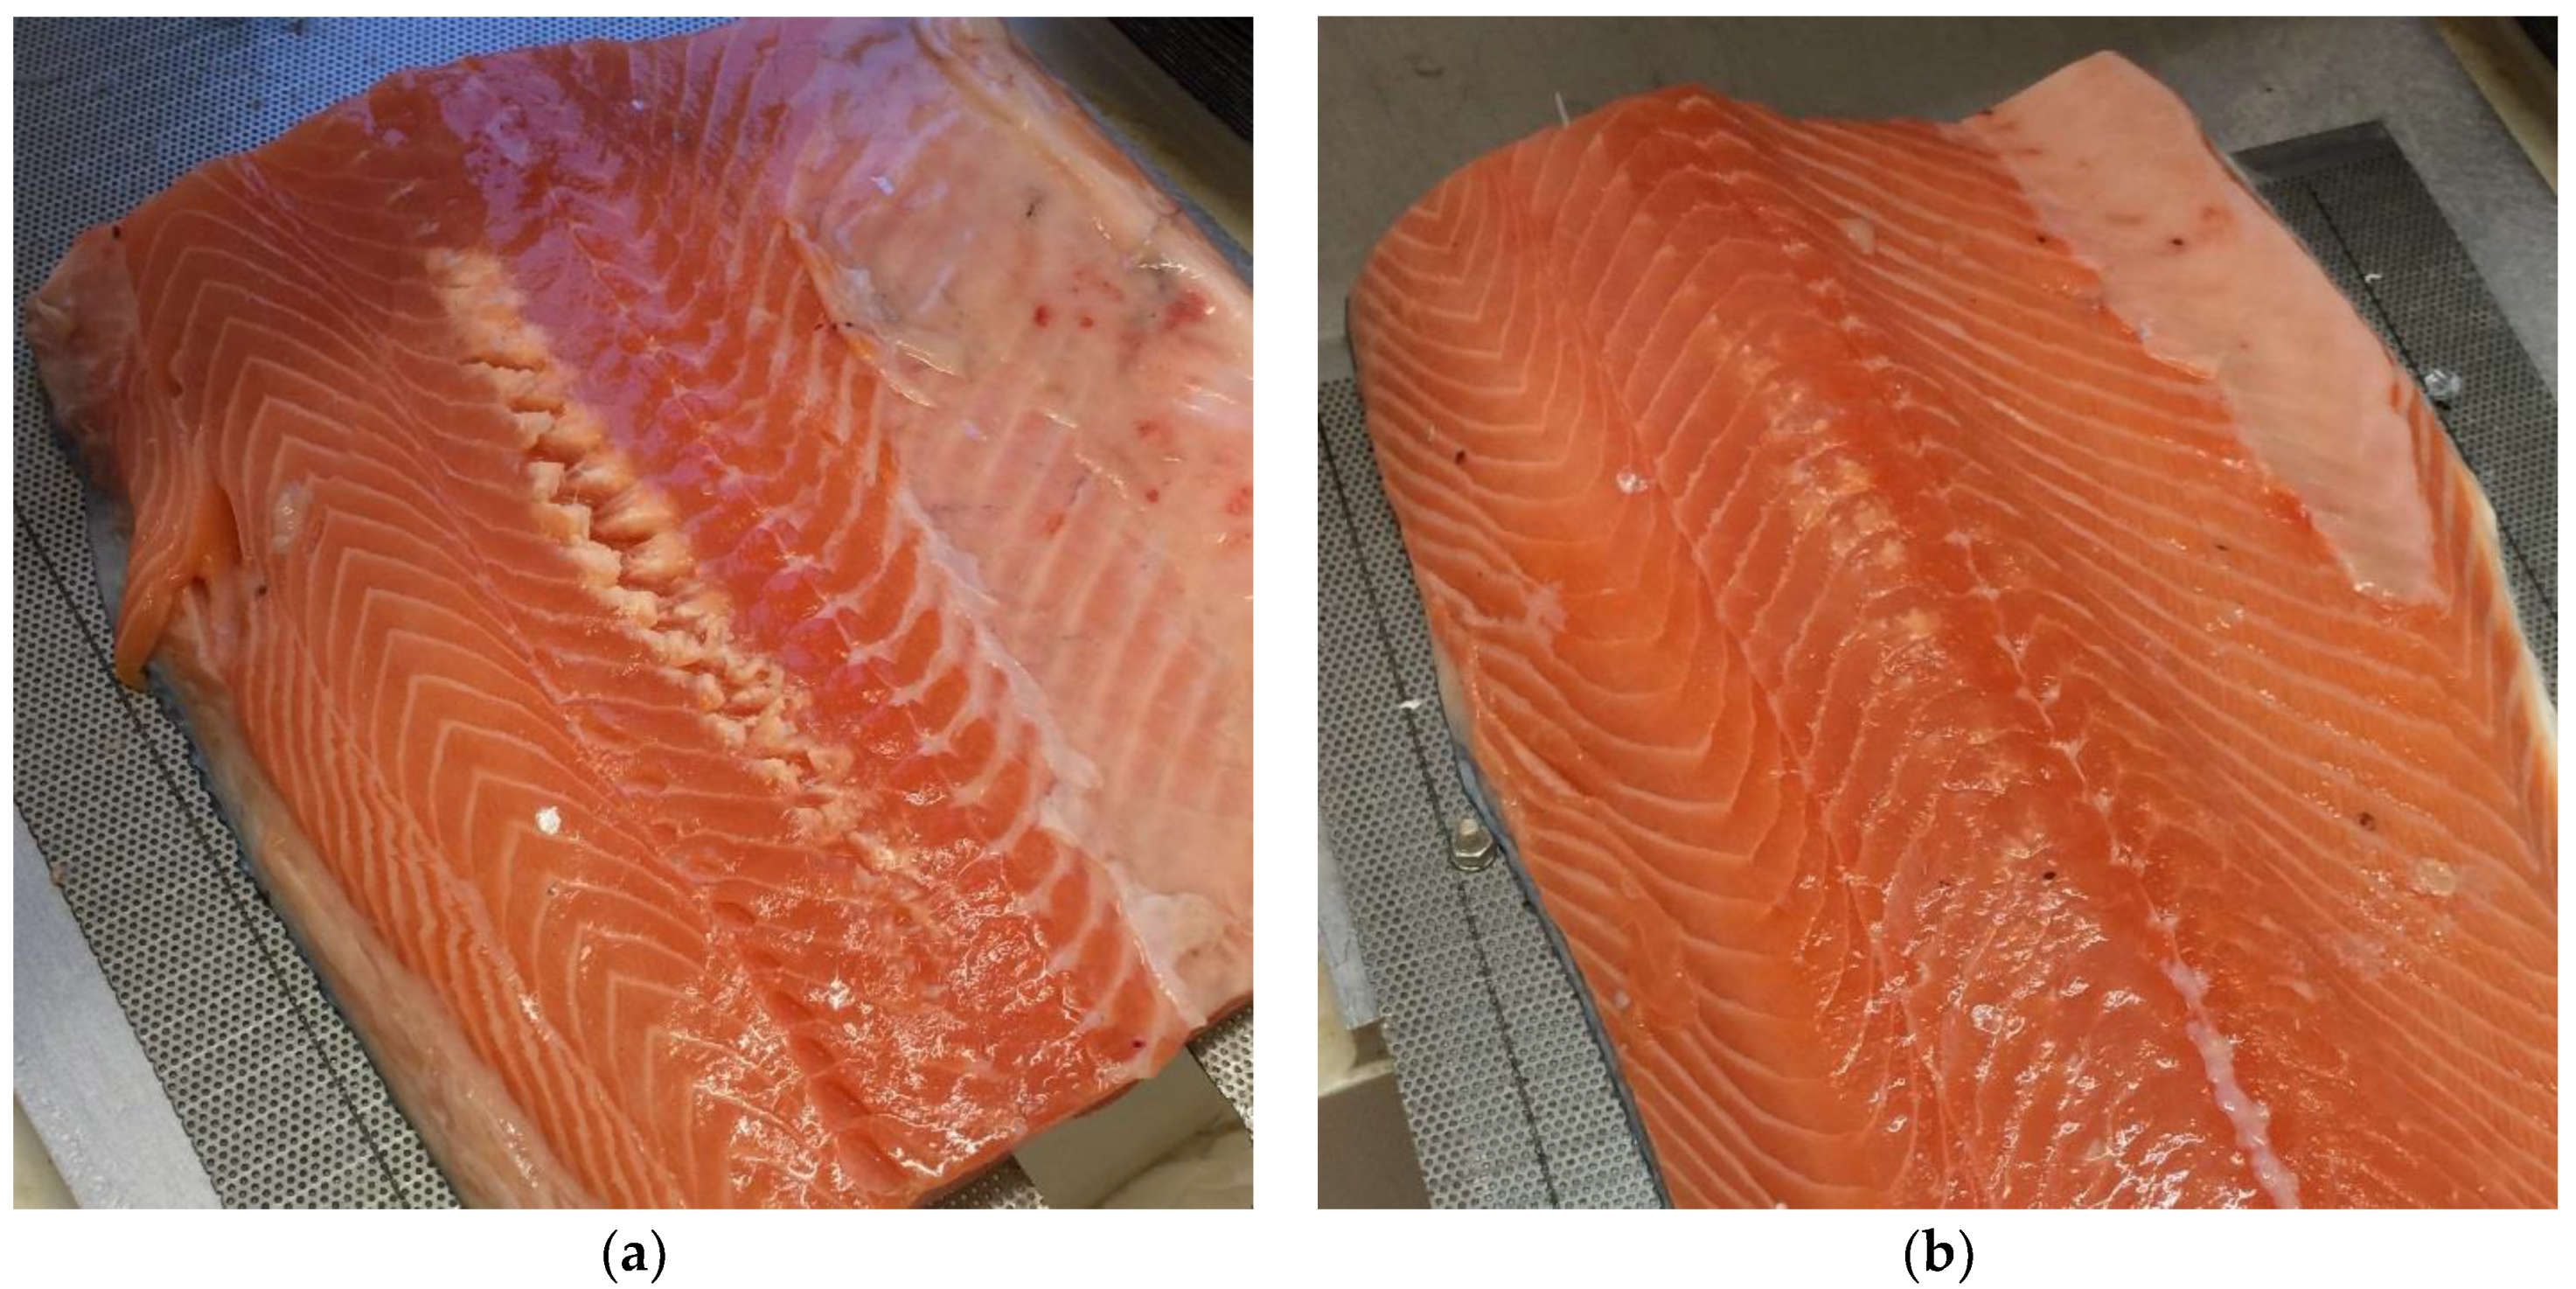 Foods | Free Full-Text | Weakening Pin Bone Attachment in Fish Fillets ...